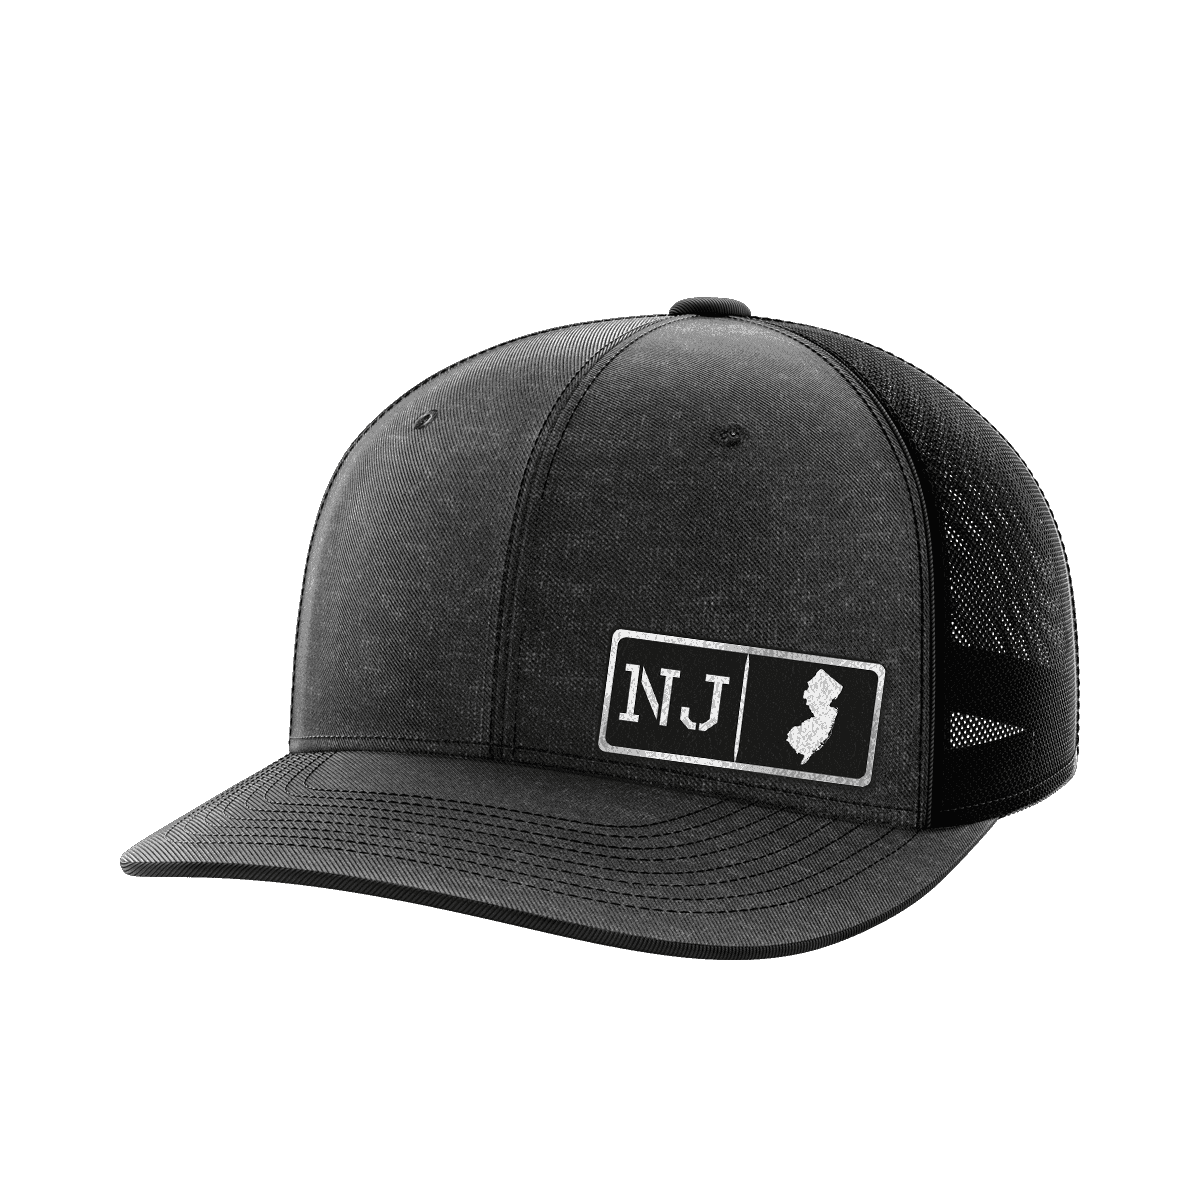 Thumbnail for New Jersey Homegrown Hats - Greater Half